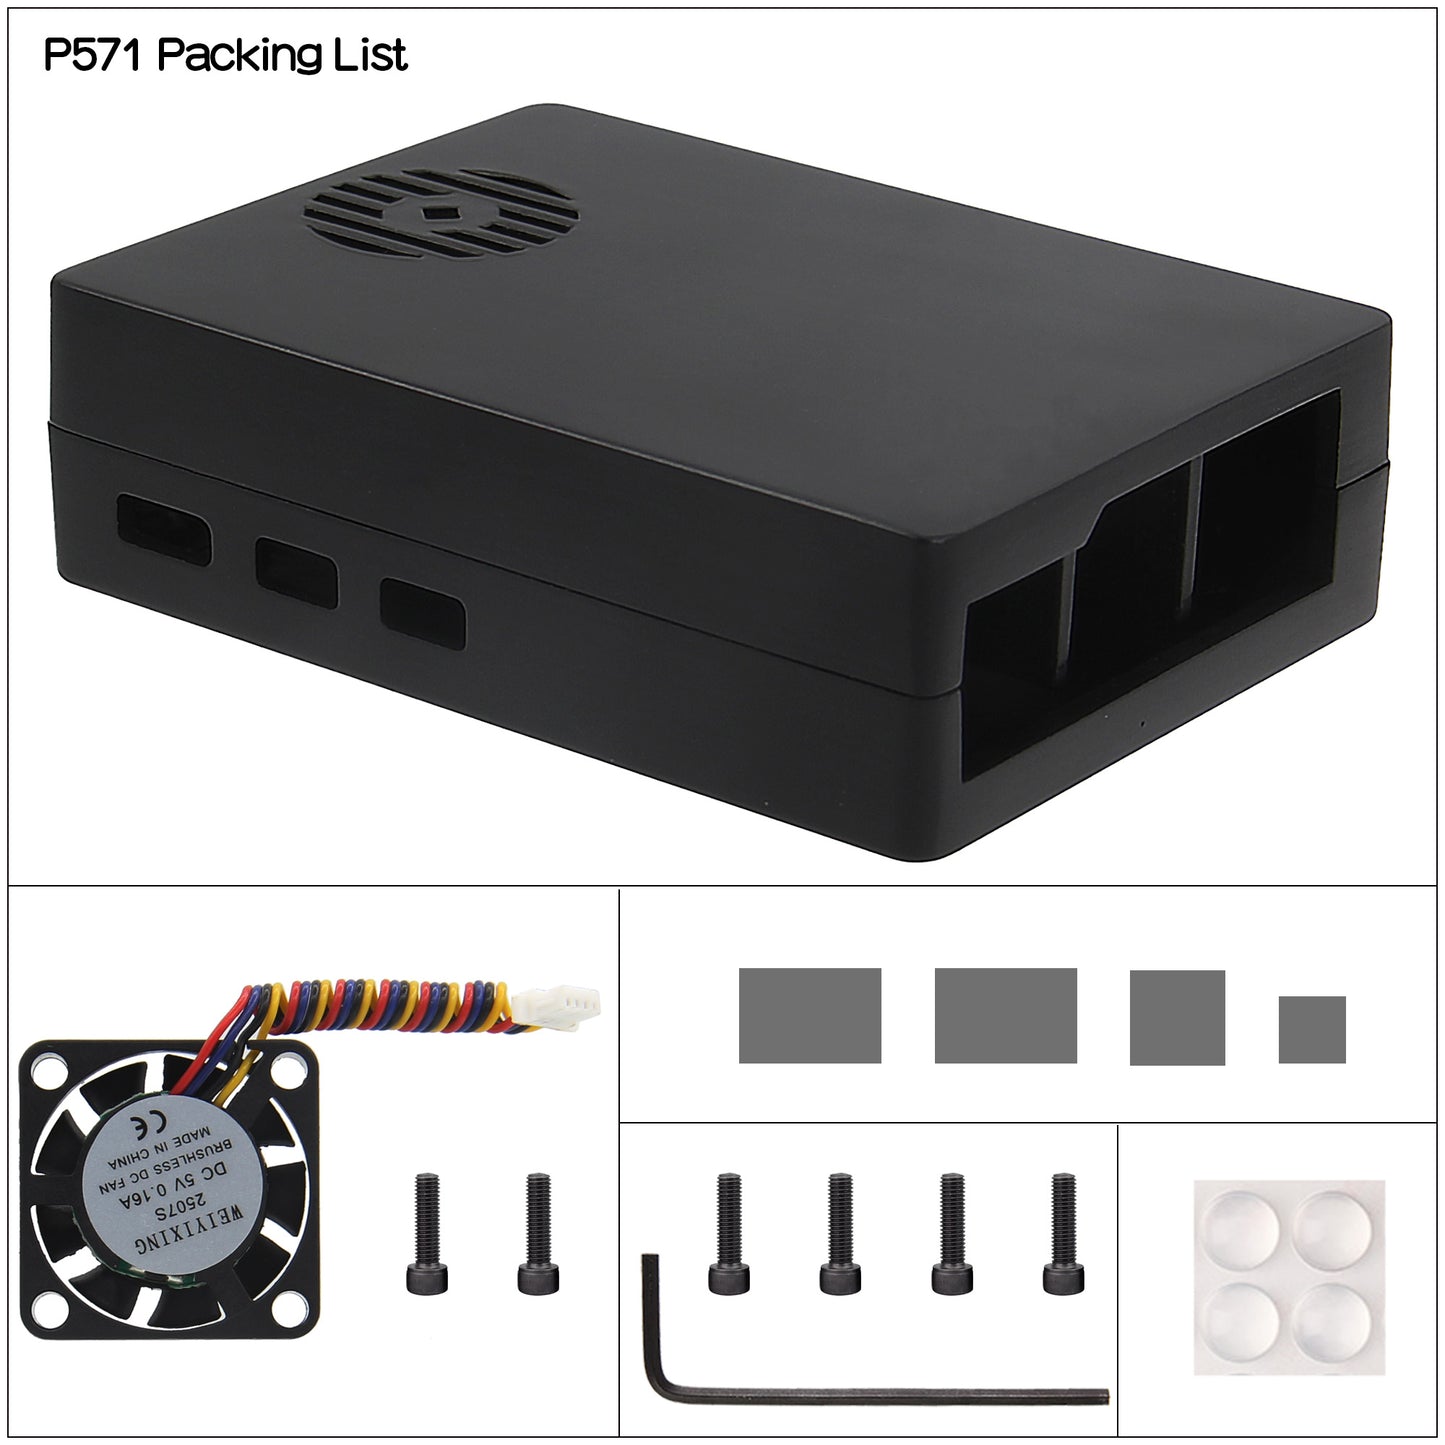 Geekworm Raspberry Pi 5 Aluminum Passive Cooling Case with Cooling Fan (P571)